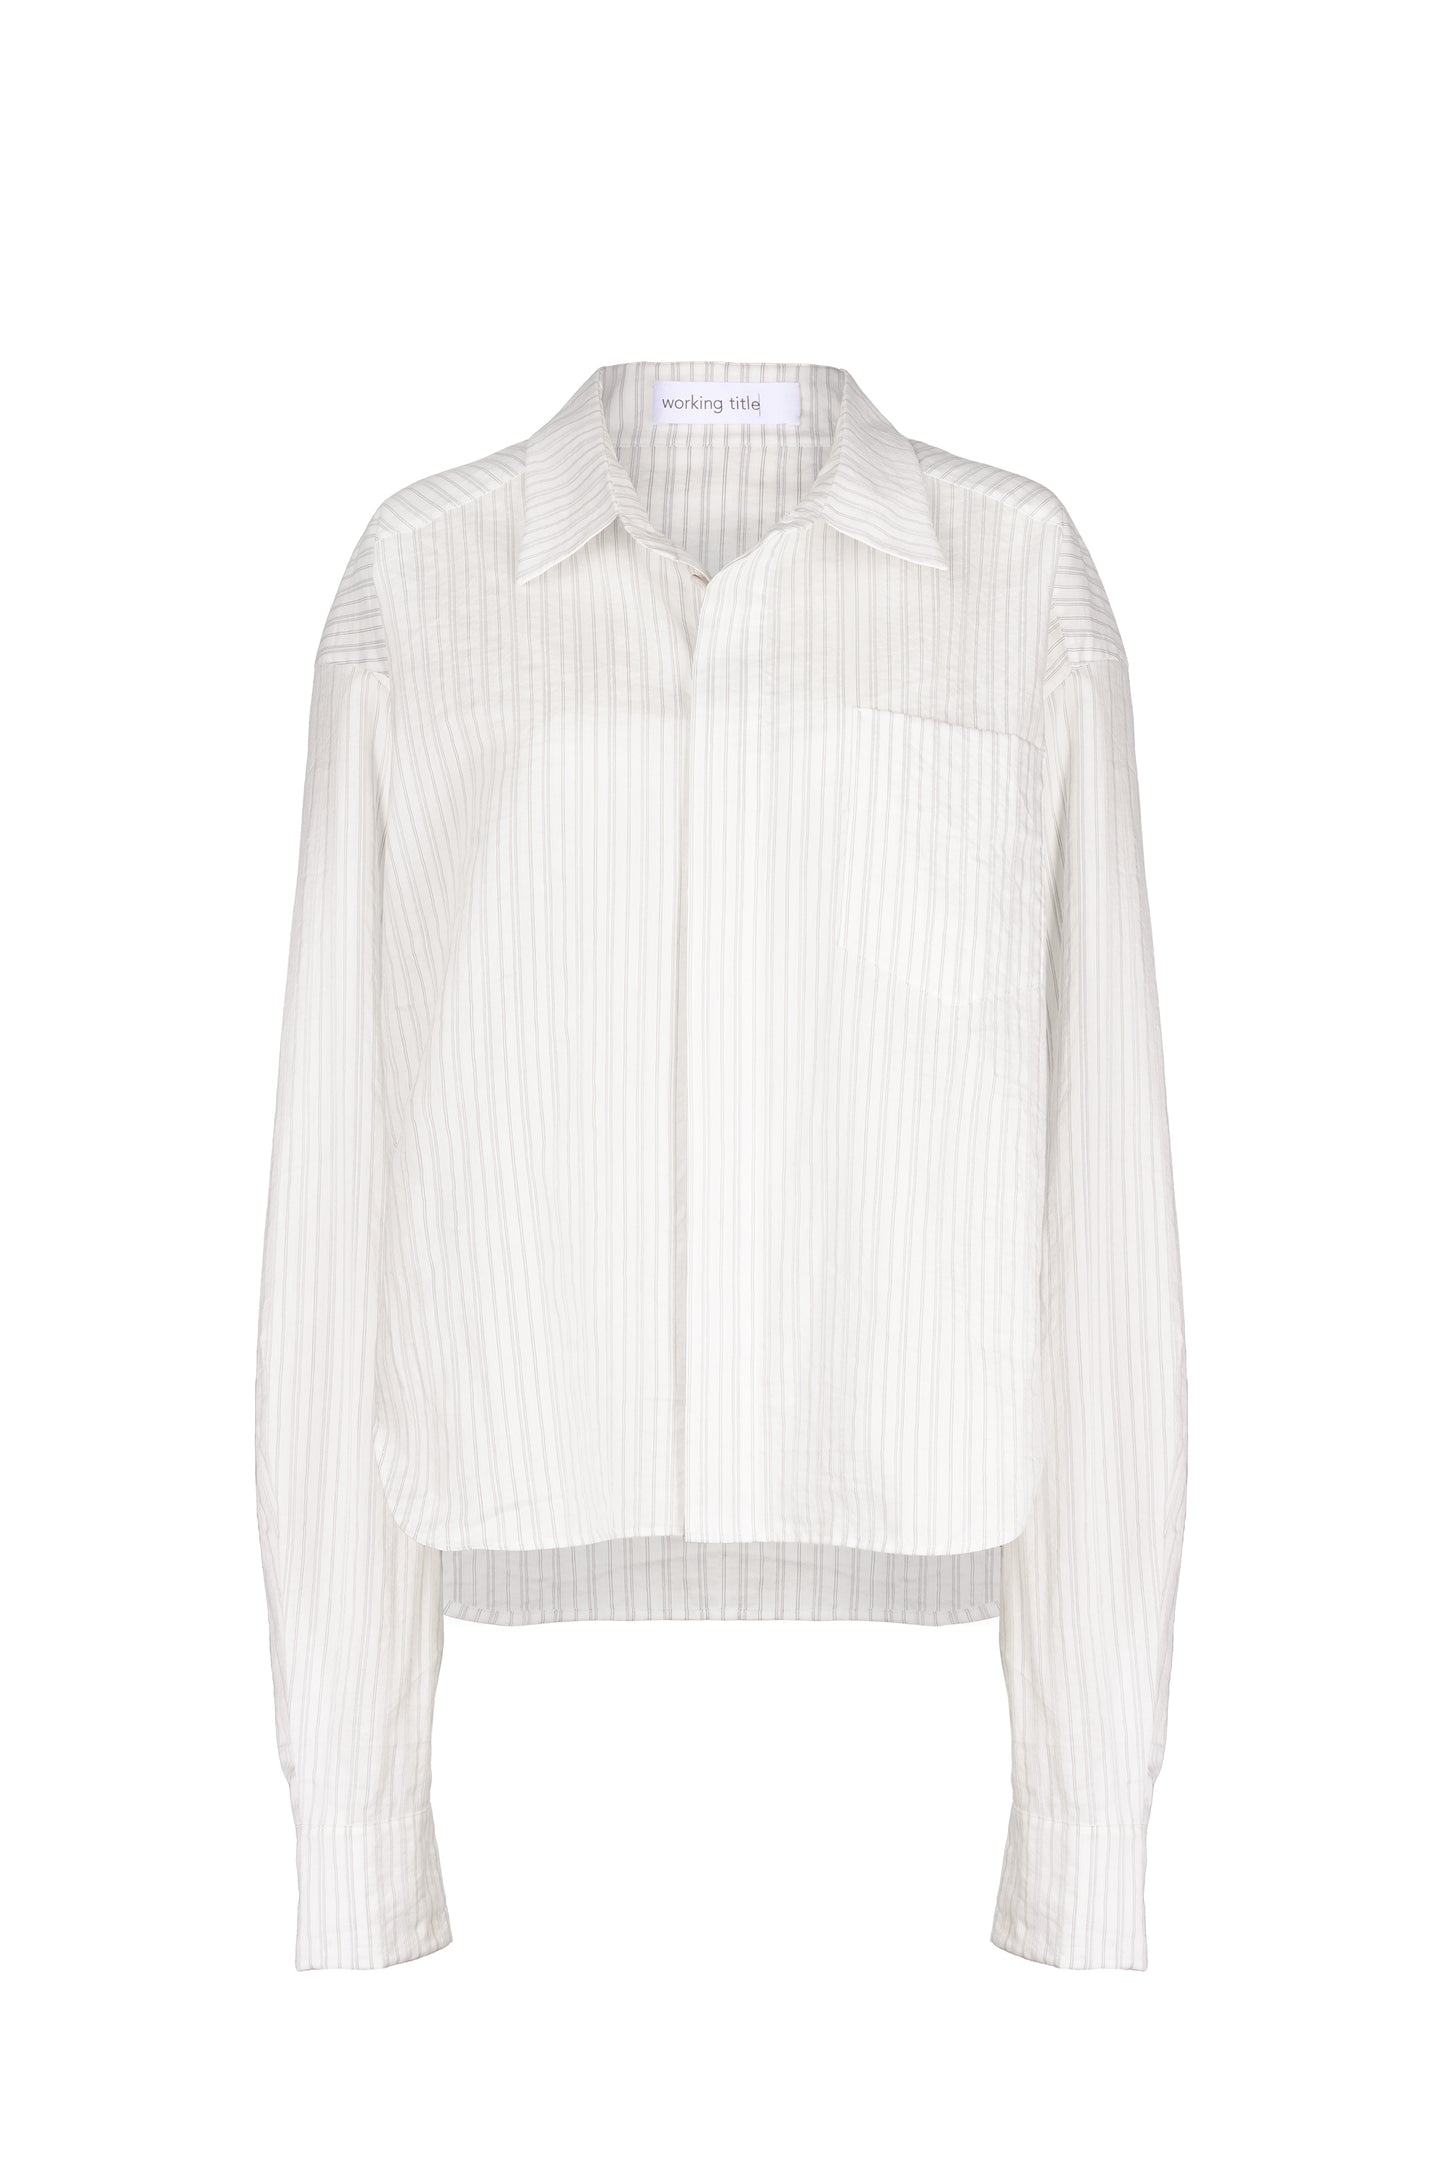 Elegant oversized cotton silk shirt with a classic collar and subtle striped pattern, ideal for both casual and formal wear.